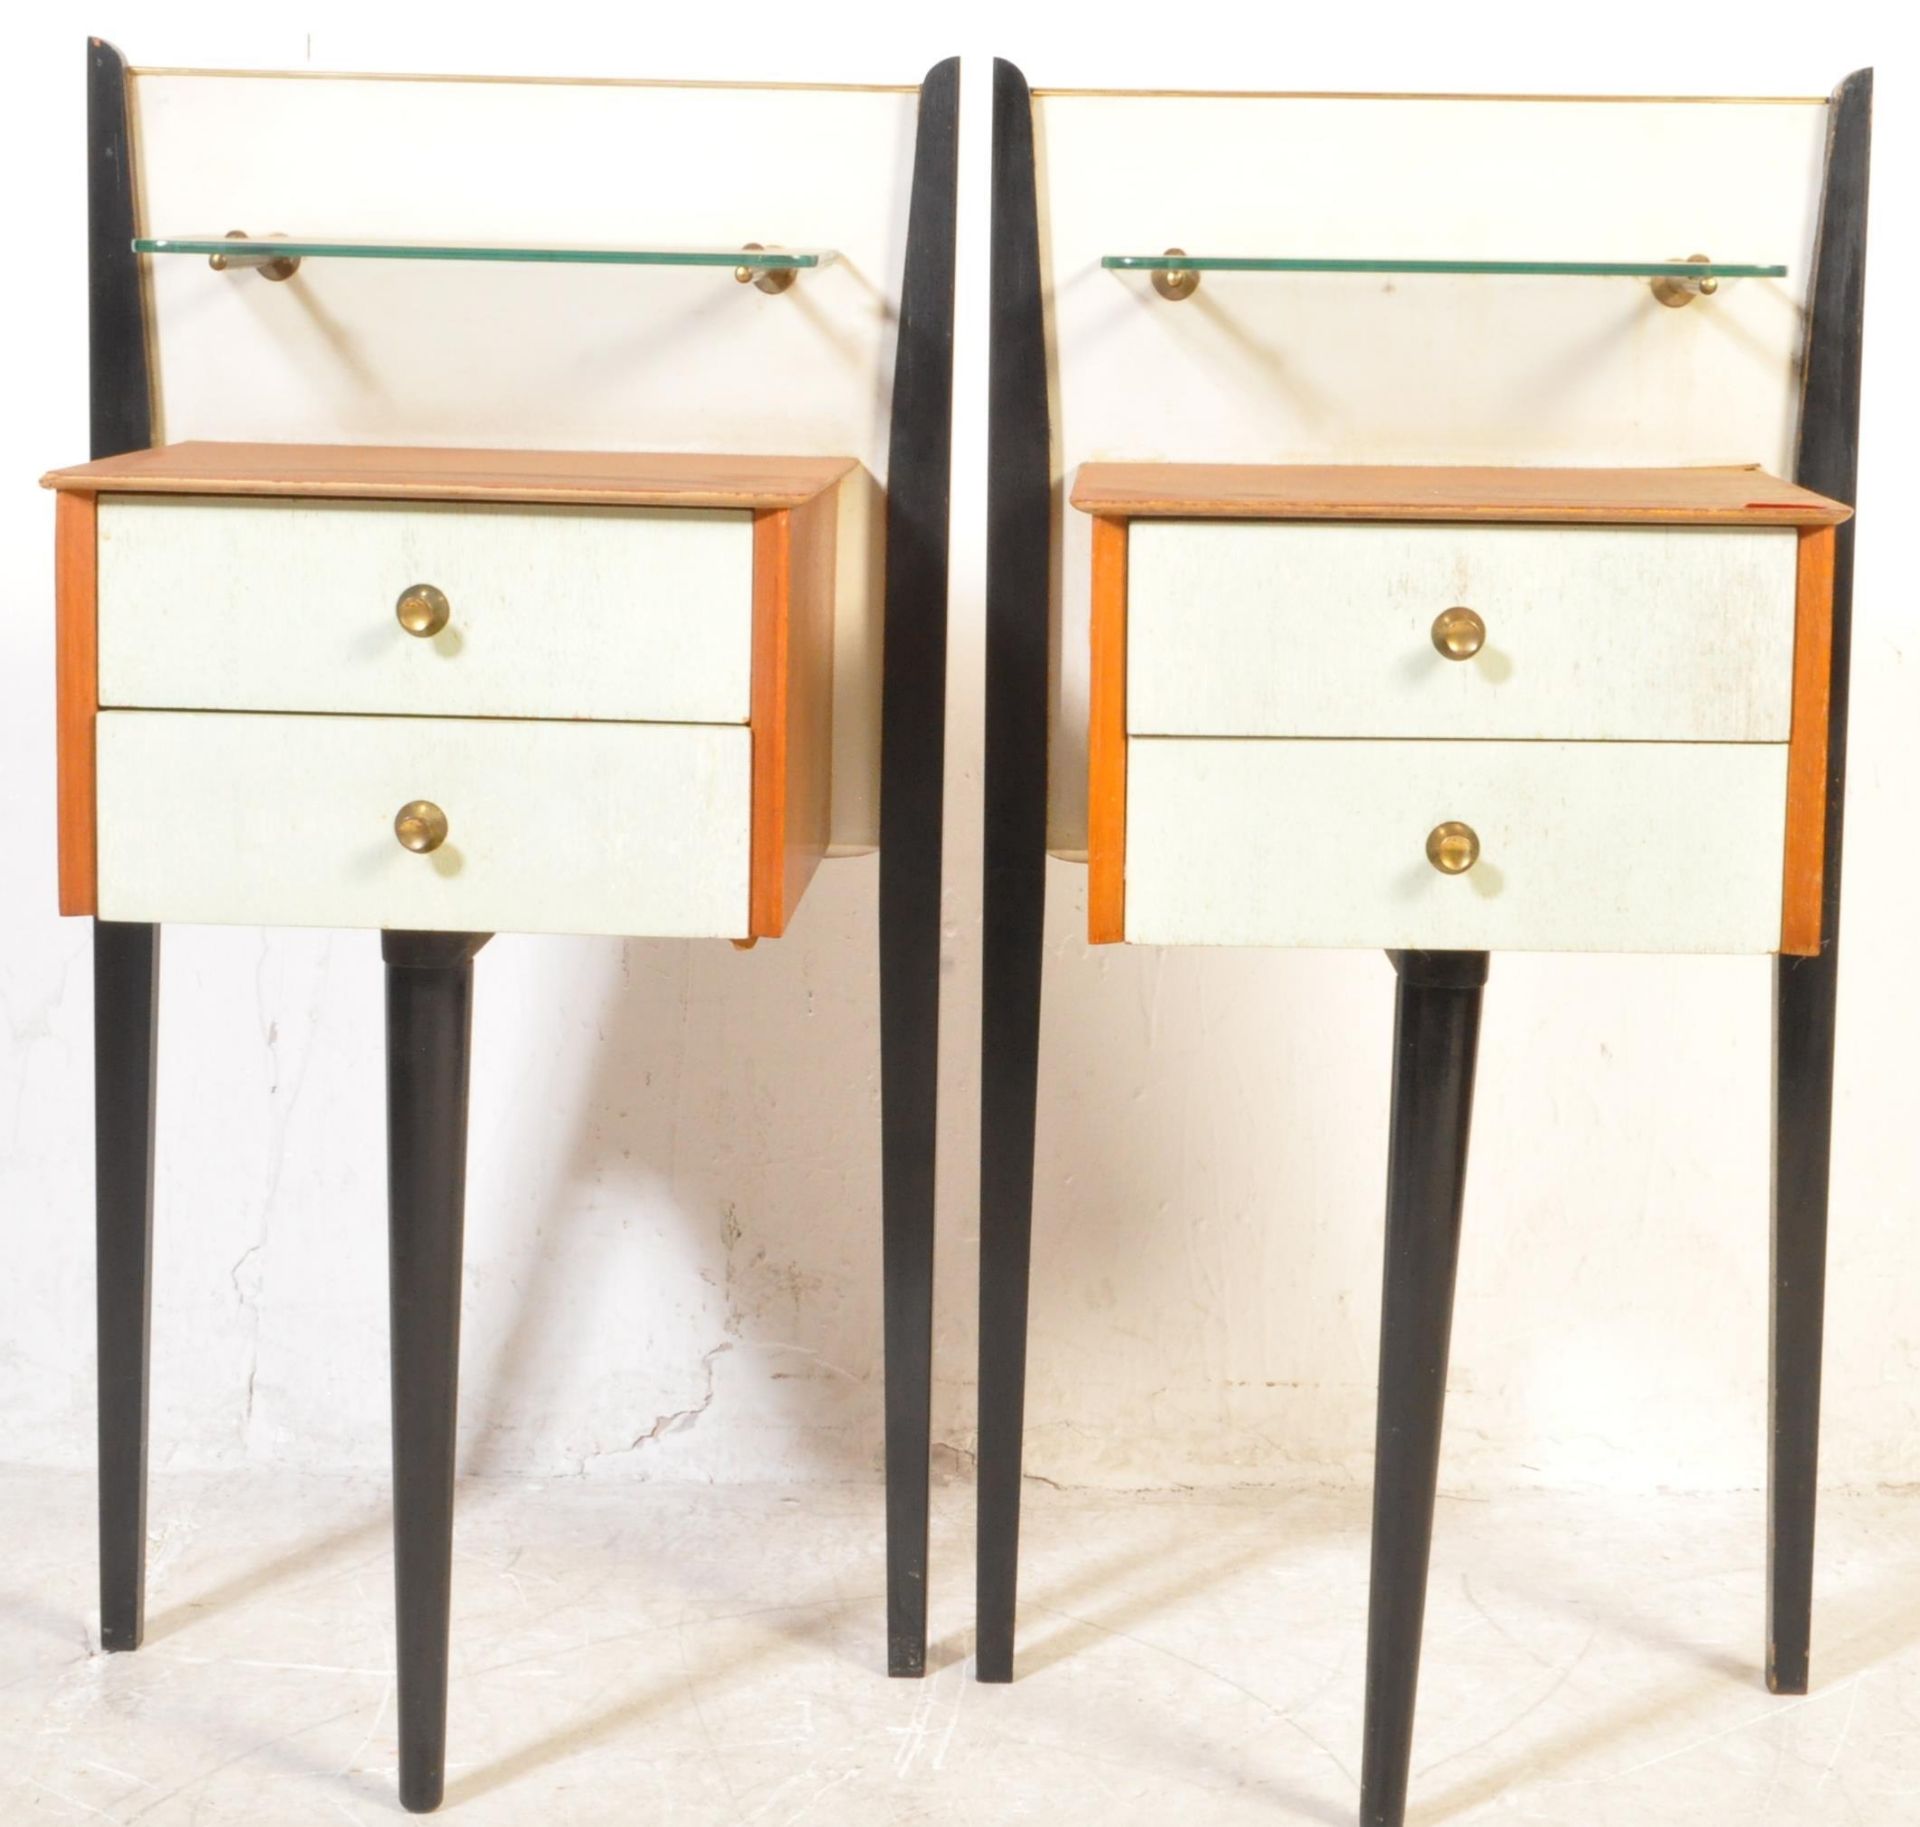 PAIR OF MID CENTURY LIMELIGHT FURNITURE BEDSIDE CHESTS